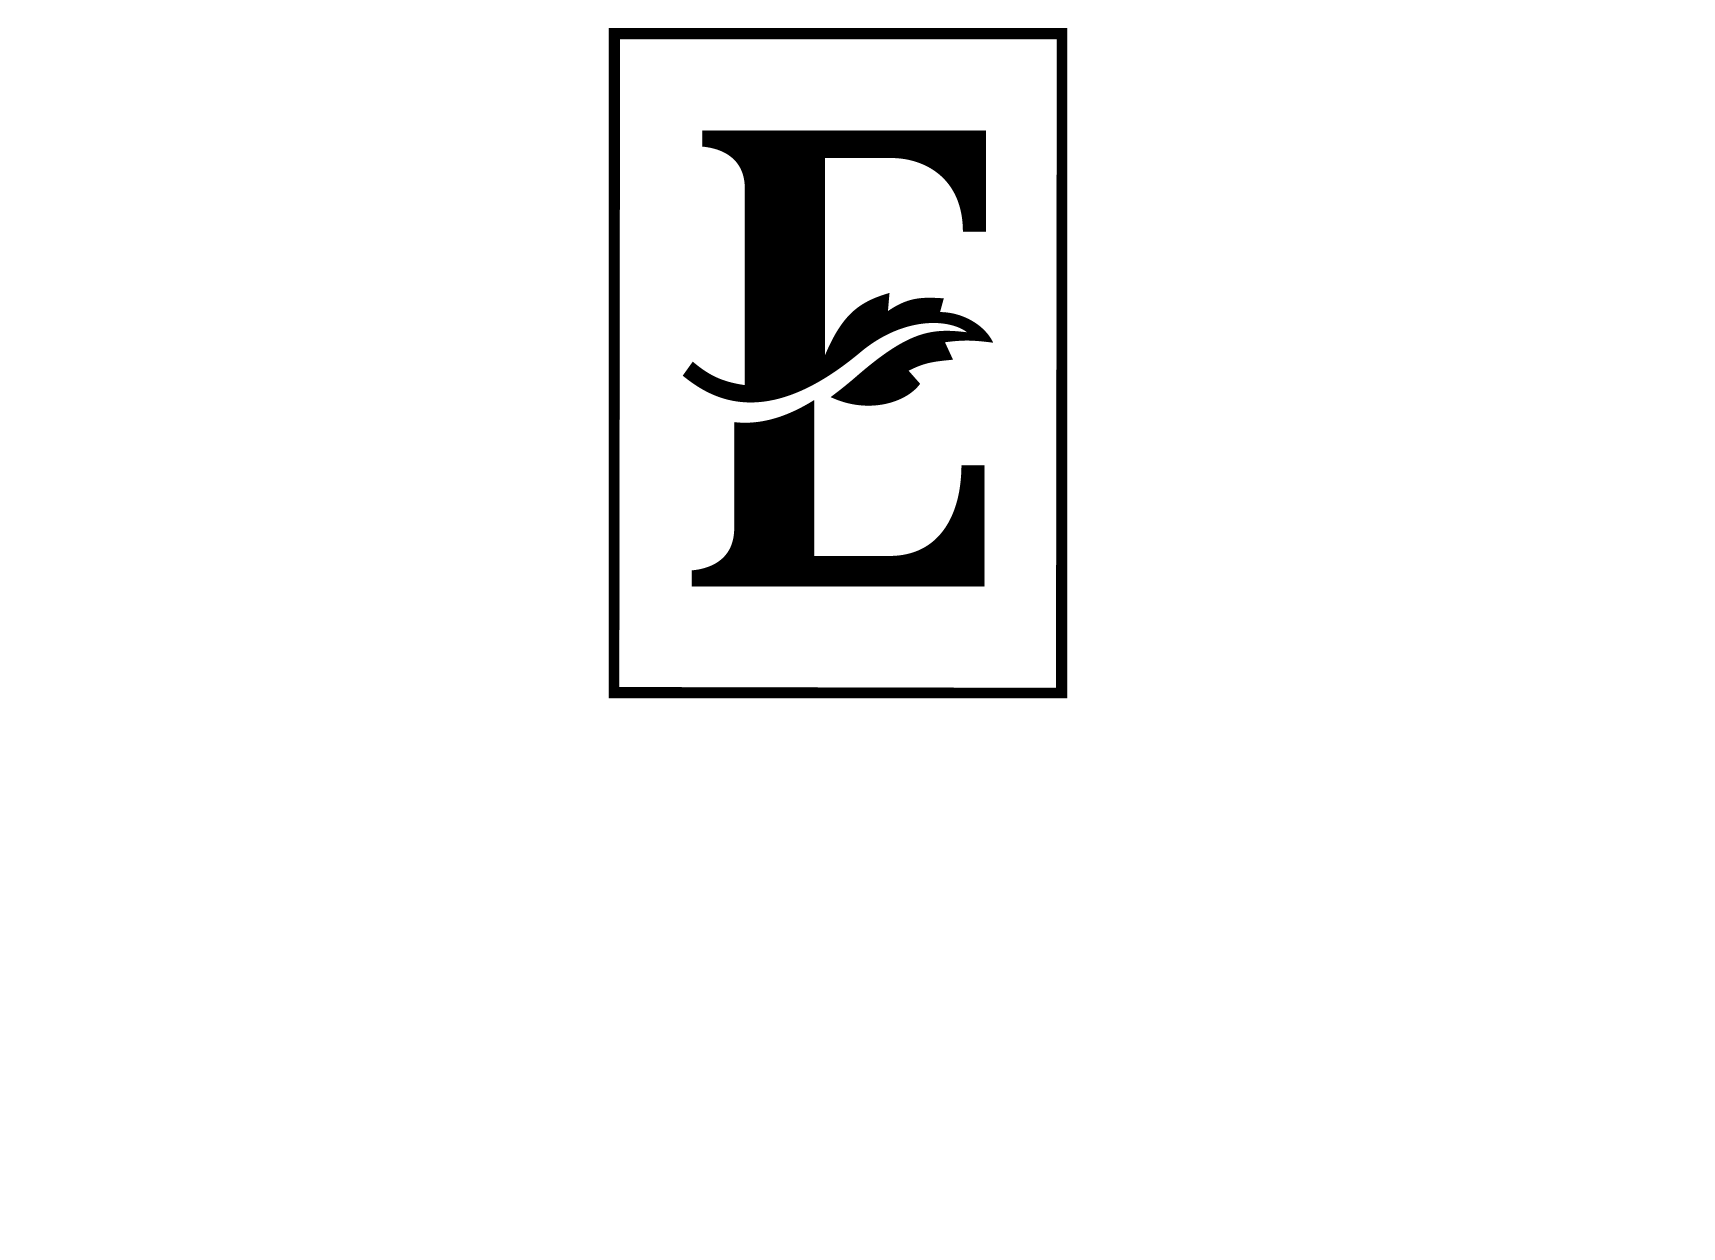 Embassy Suites Logo - Embassy Suites of America Group